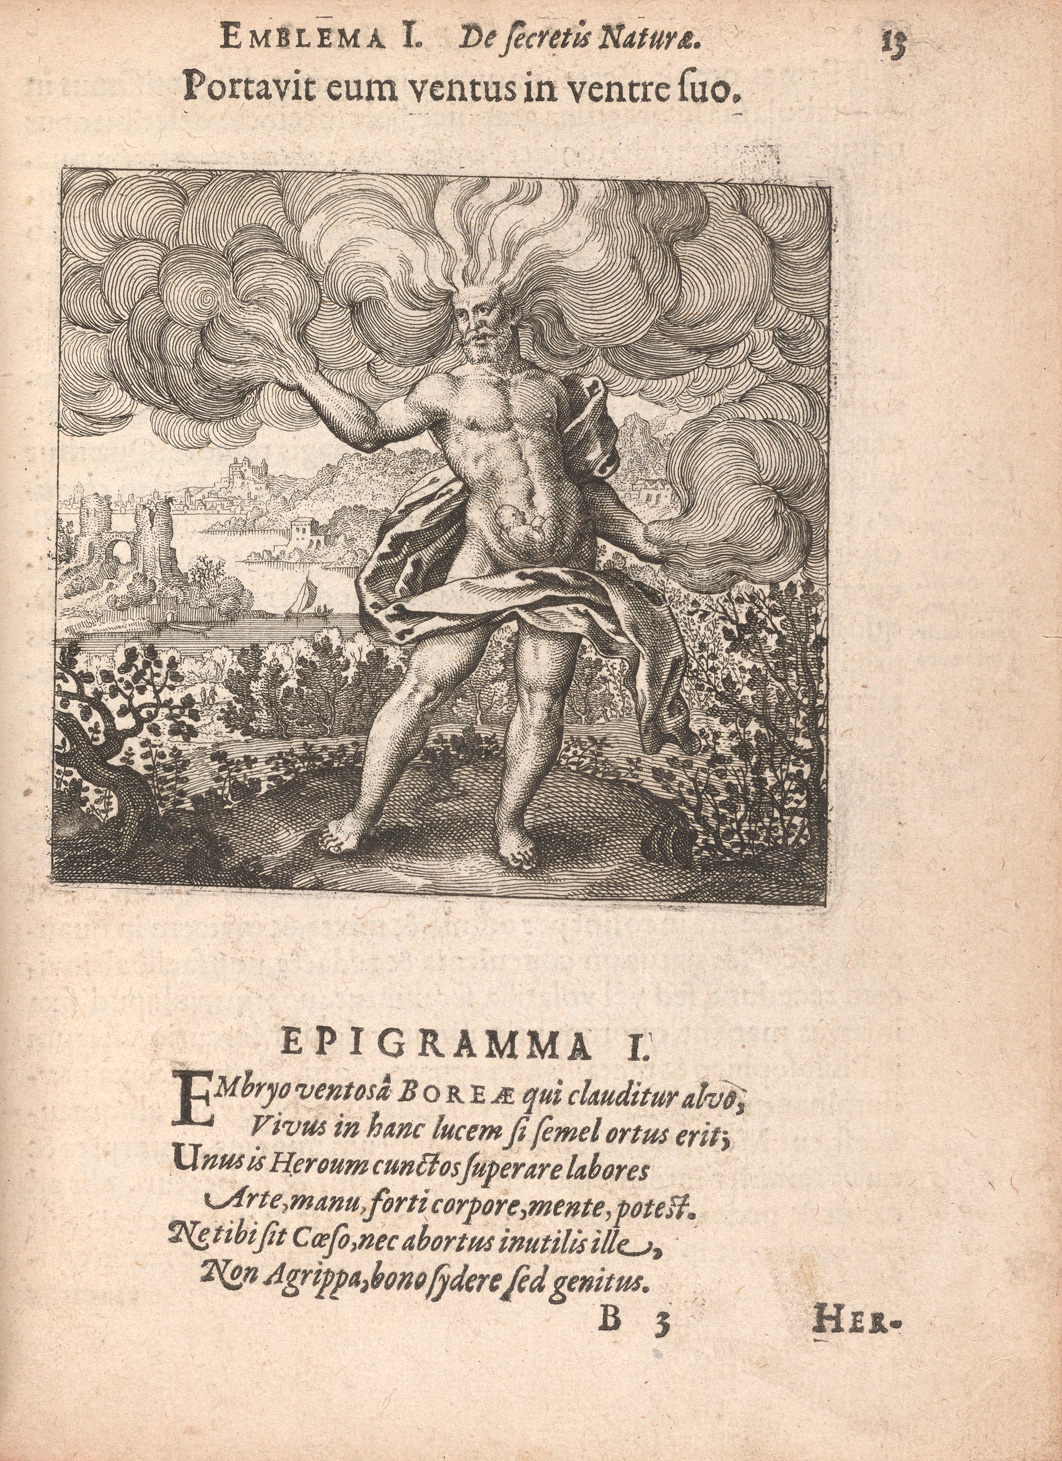 The second page of emblem 1 from Atalanta fugiens shows a motto and epigram in Latin and an image. In the image, a bearded nude man, identified as Boreas, with wind gusts extending from his head and arms, has a fetus inside his stomach. He is standing amongst bushes with a river and cityscape in the background.